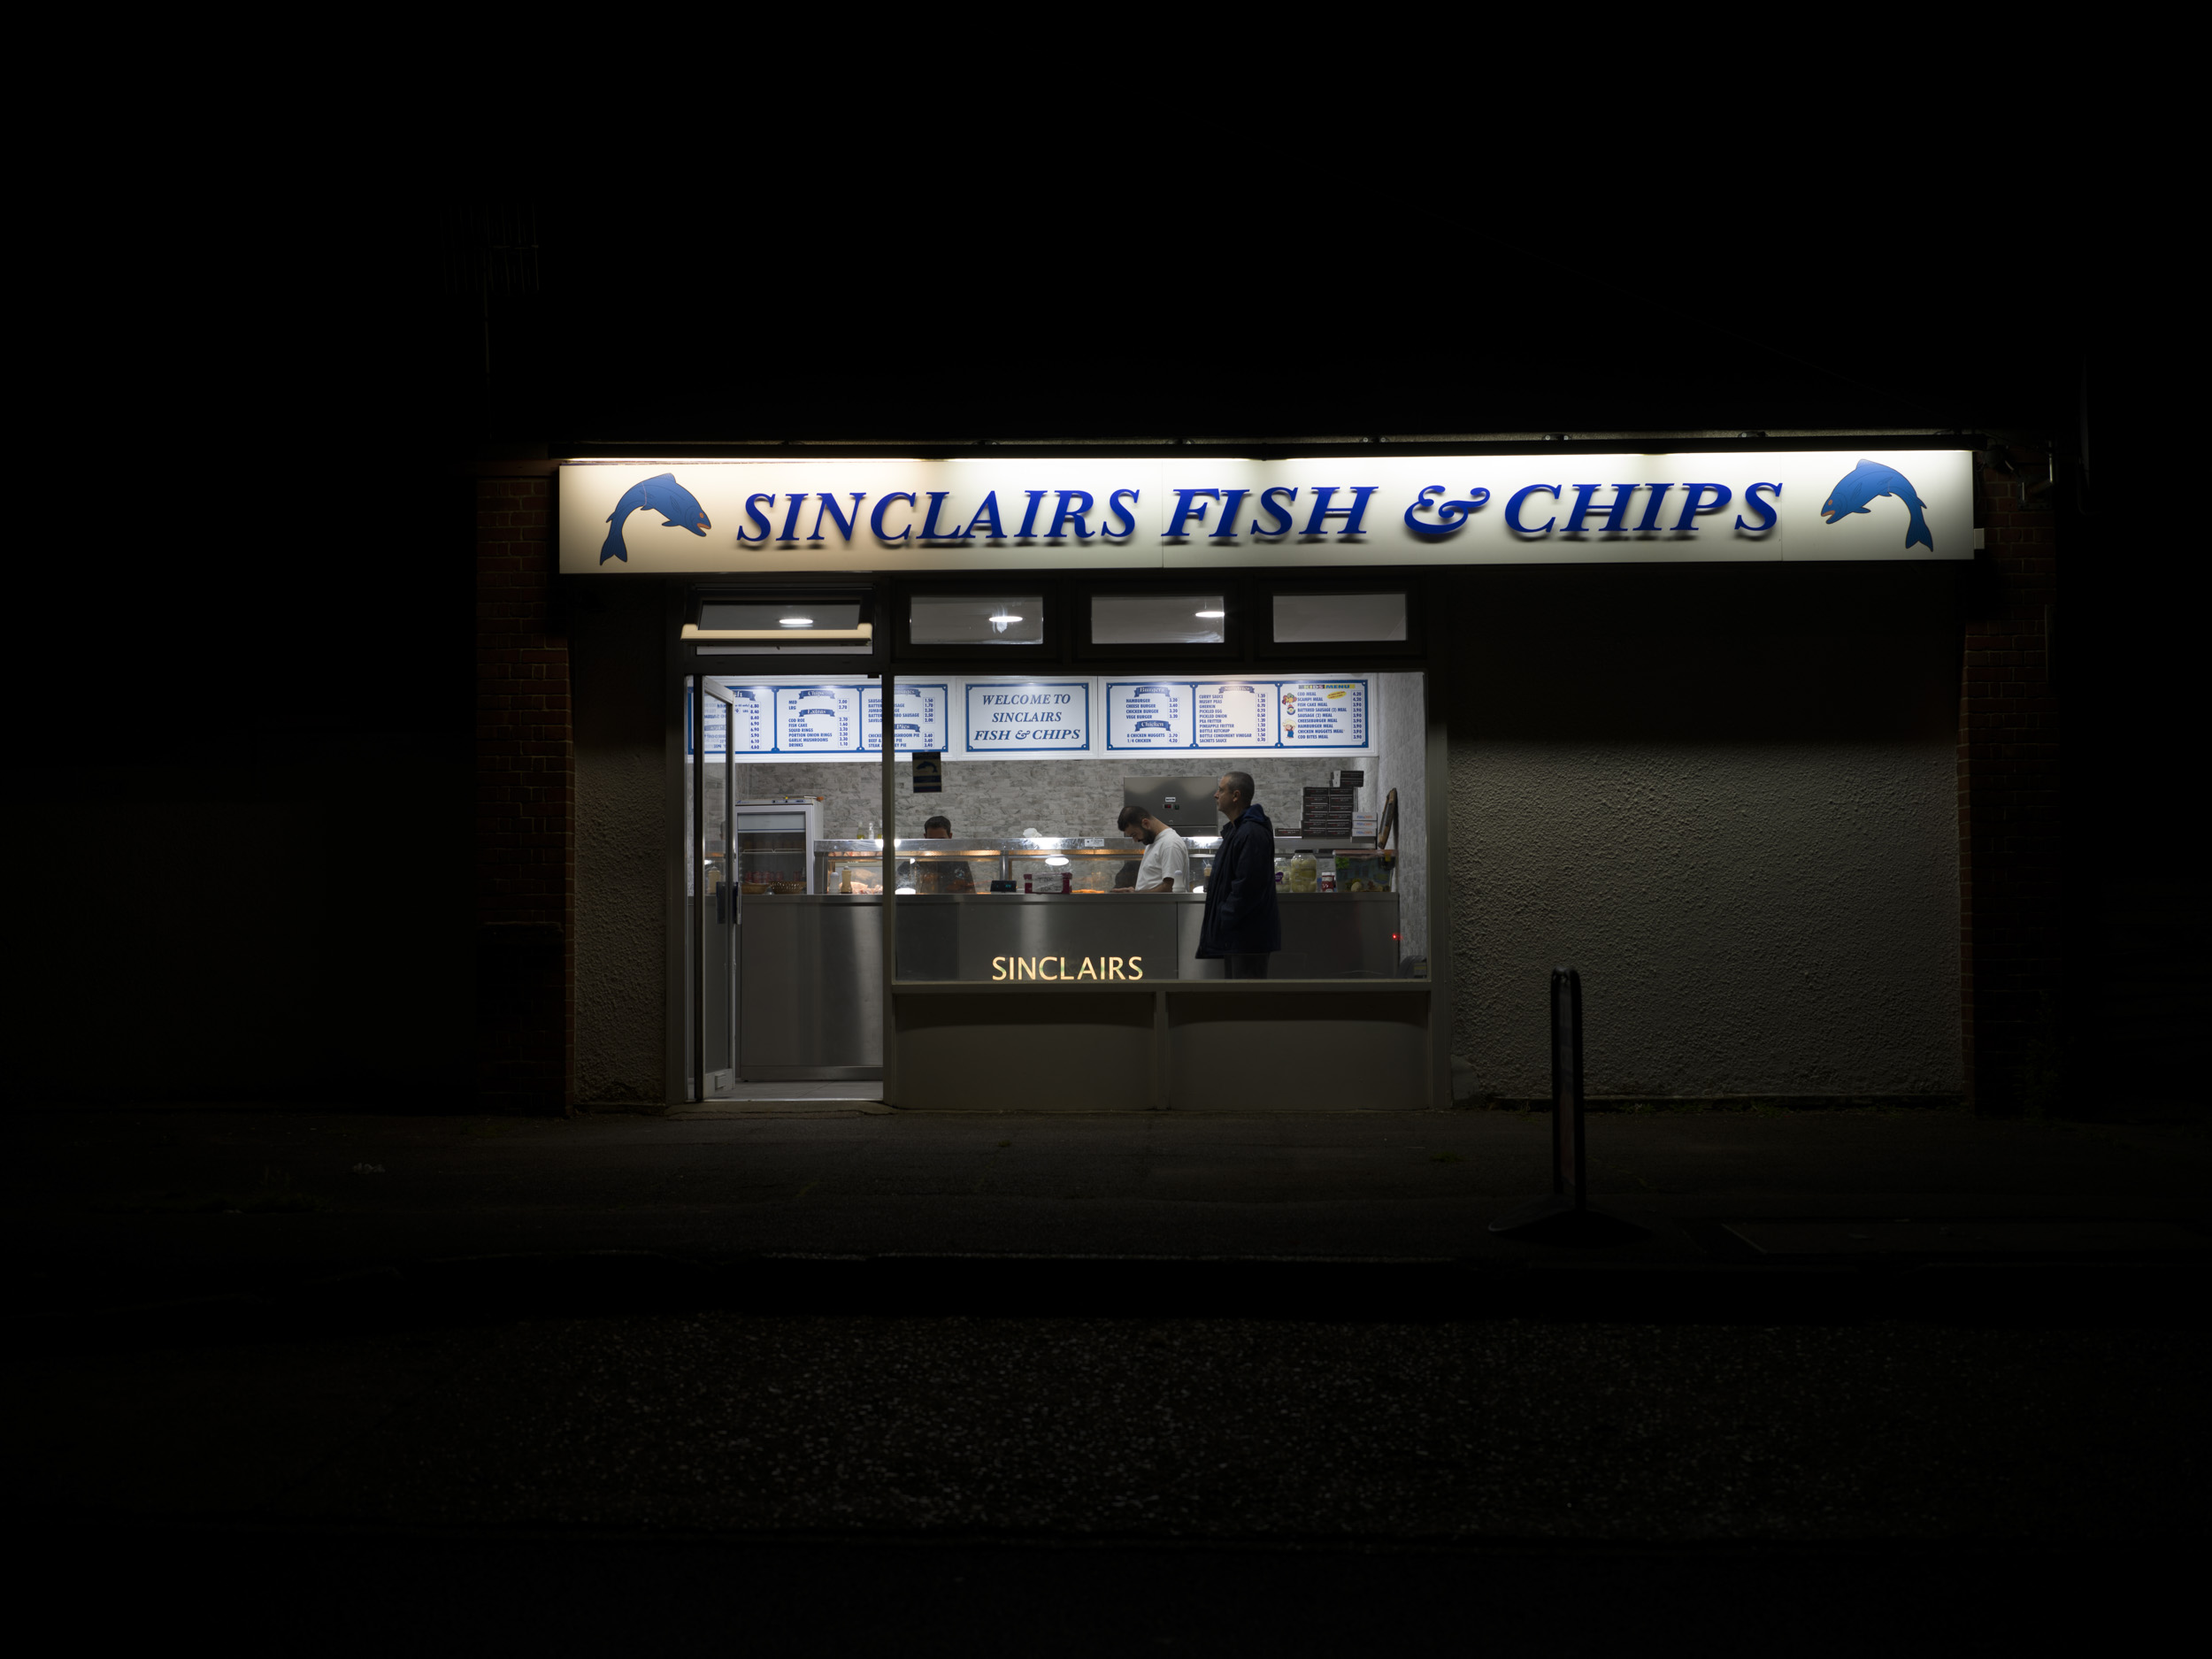 Sample image taken with the Hasselblad X2D 100C of a fish and chip shop at night